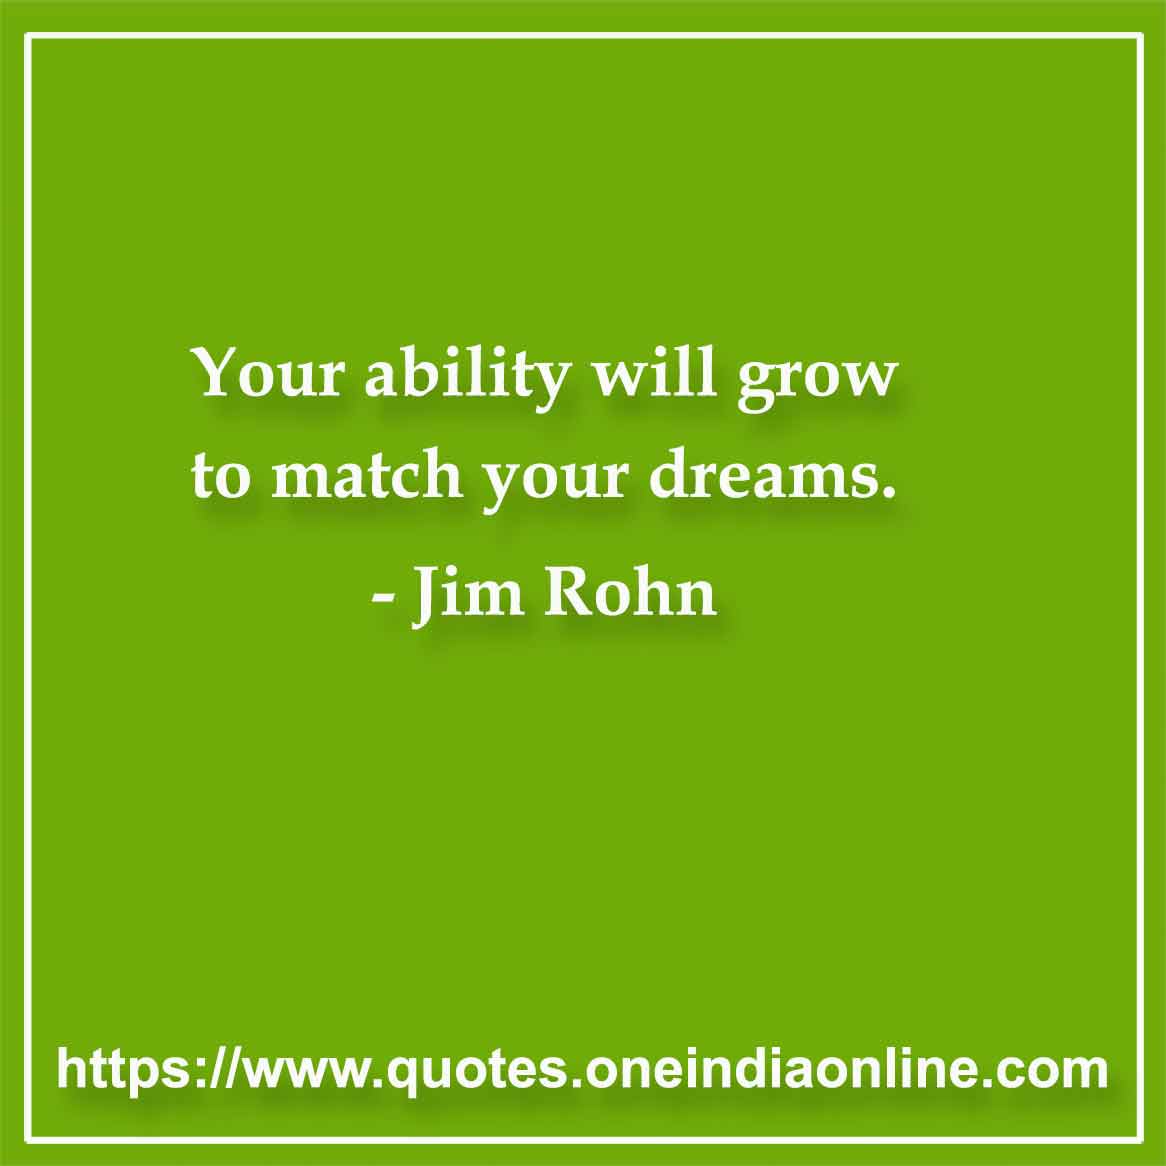 Your ability will grow to match your dreams.

-by Jim Rohn